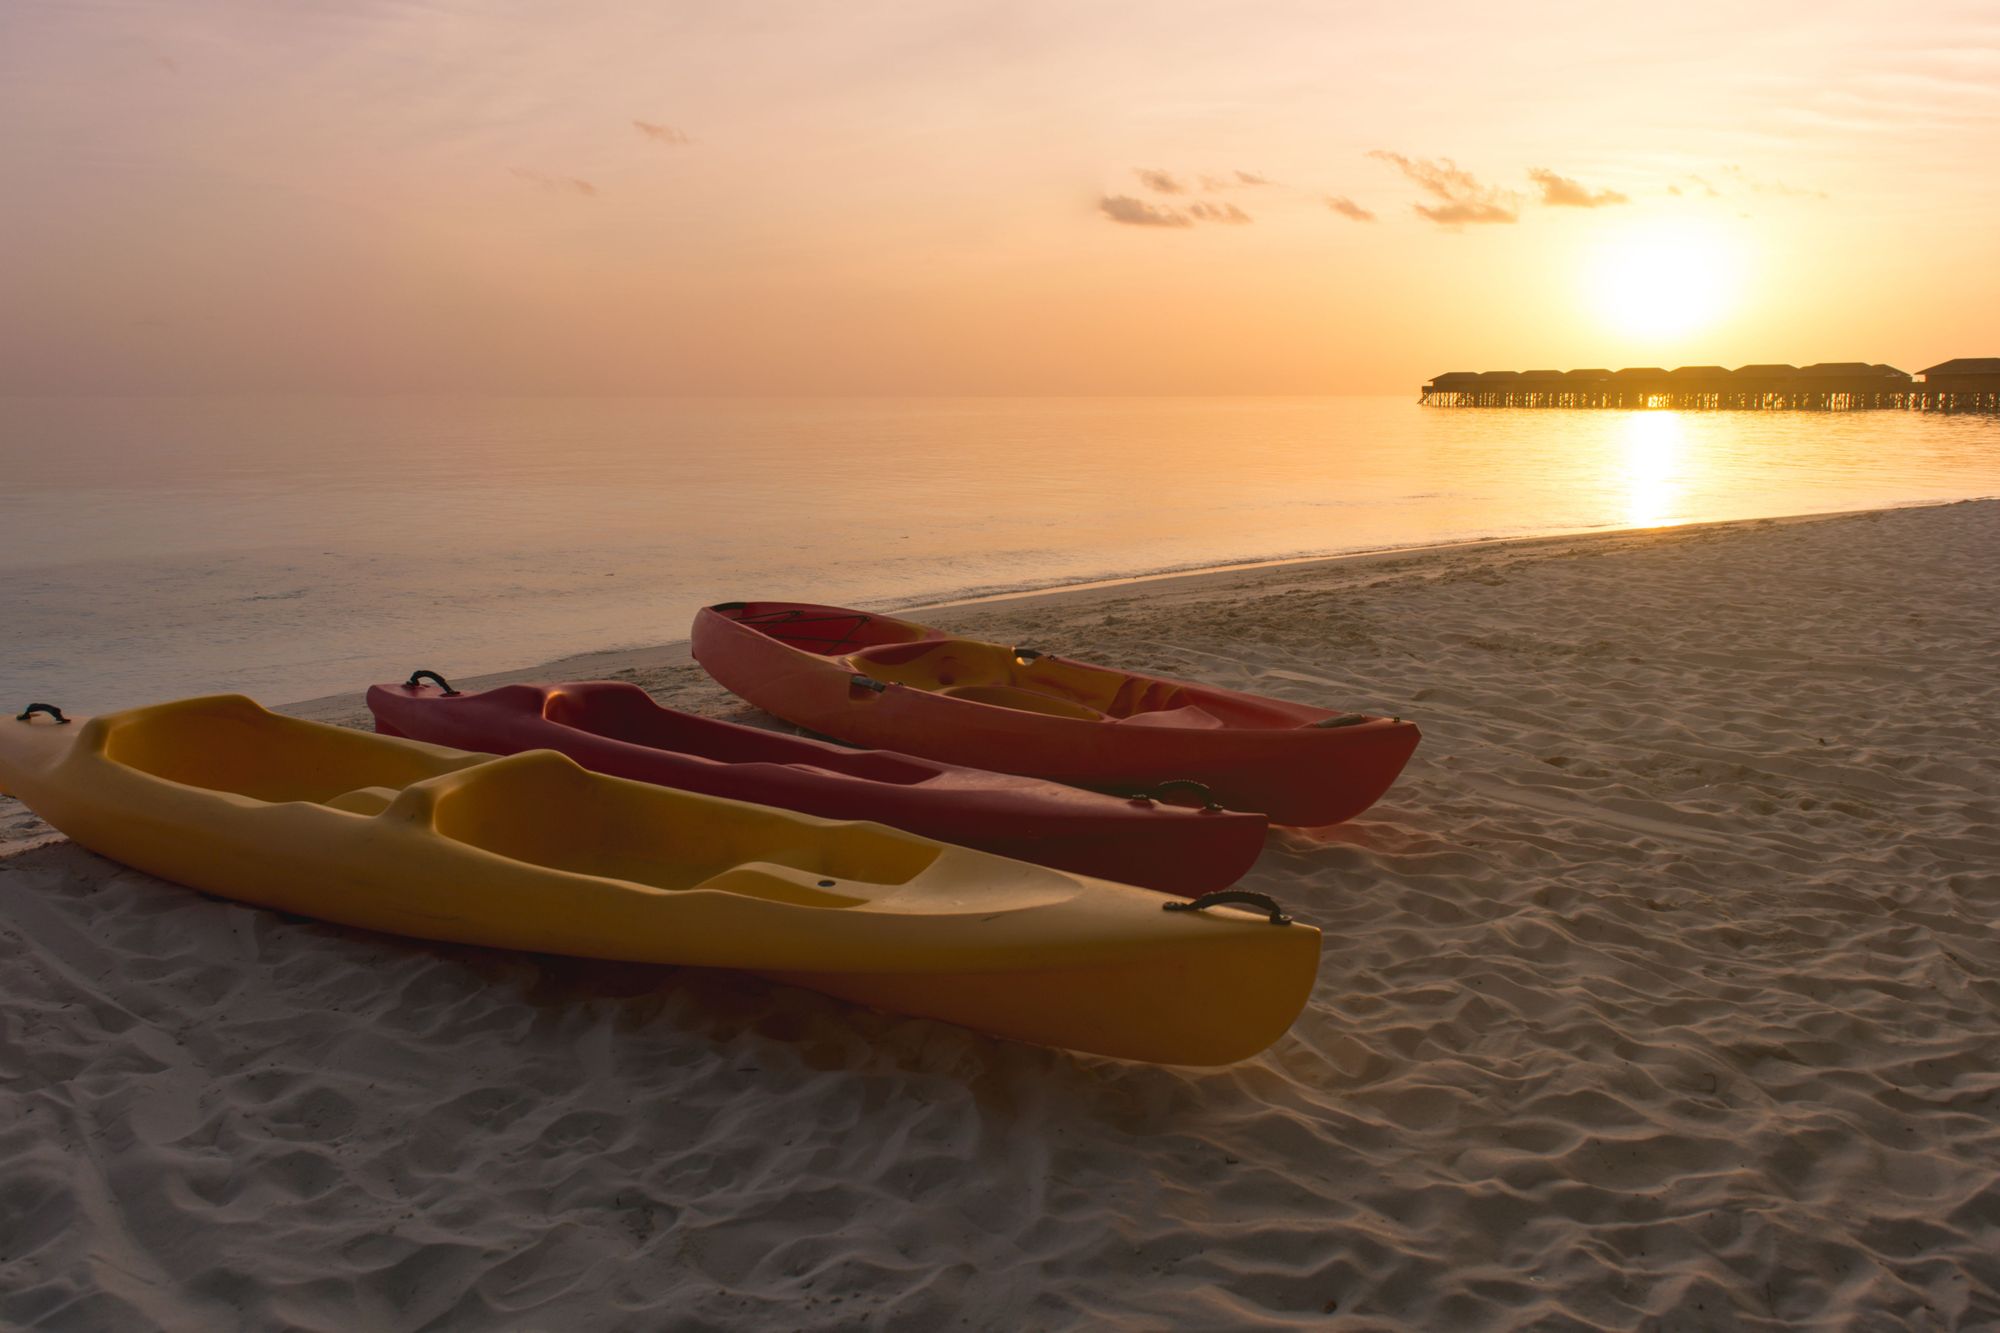 Kayaks pulled ashore in the Maldives, at sunset.